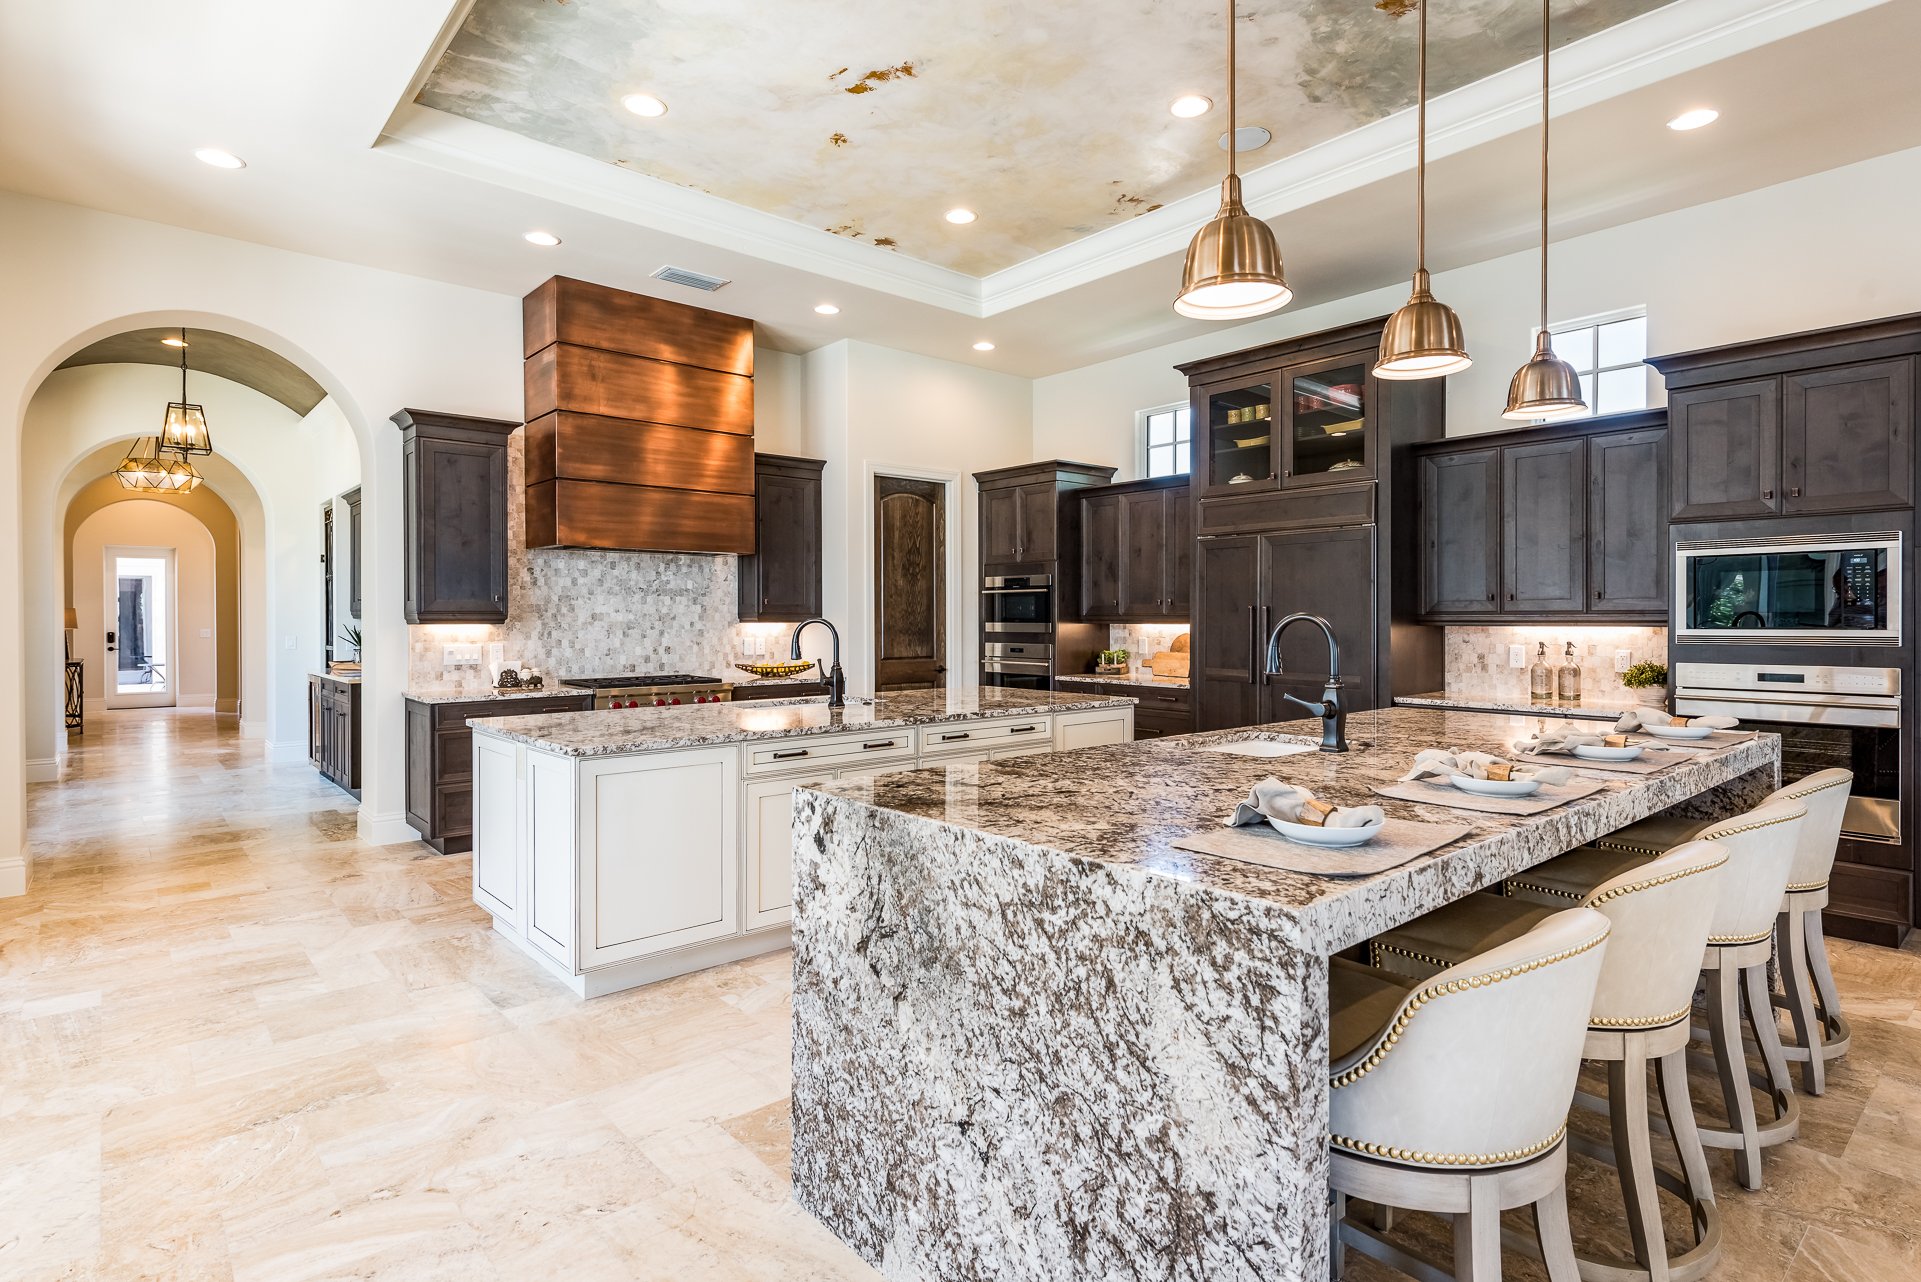 Create Color Kitchens for a Modern Luxury Home Style - Bella Collina